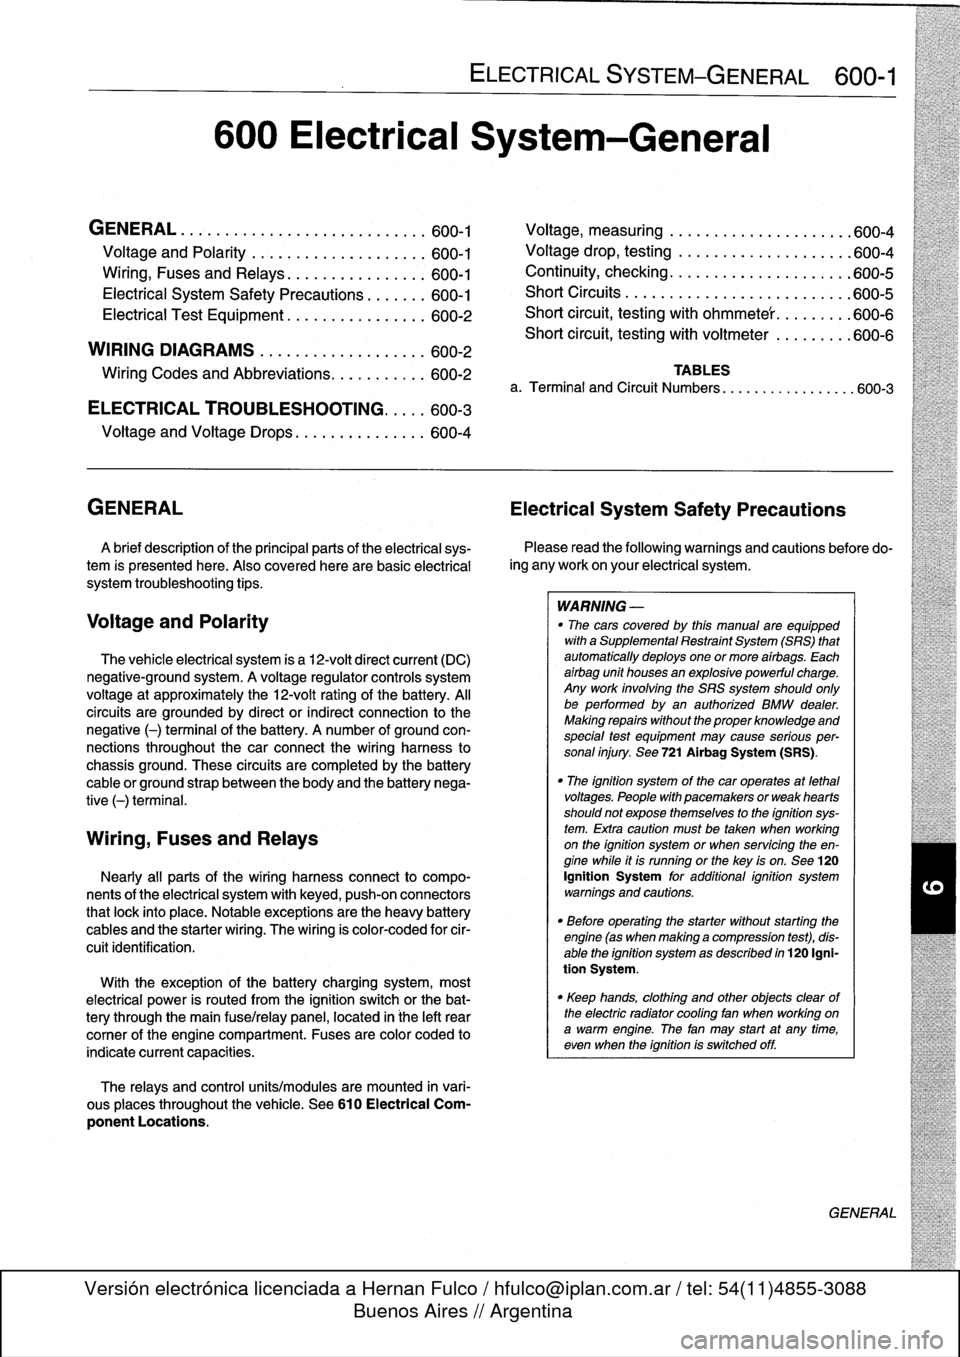 BMW 328i 1998 E36 Workshop Manual 
600
Electrical
System-General

GENERAL
.
...........
.
.
.
.
.
.
.
.
.
...
.
...
600-1

Voltage
and
Polarity
........
.
.
.
.
.
.
.
.....
600-1

Ming,
Fuses
and
Relays
............
.
.
.
.
600-1

Ele